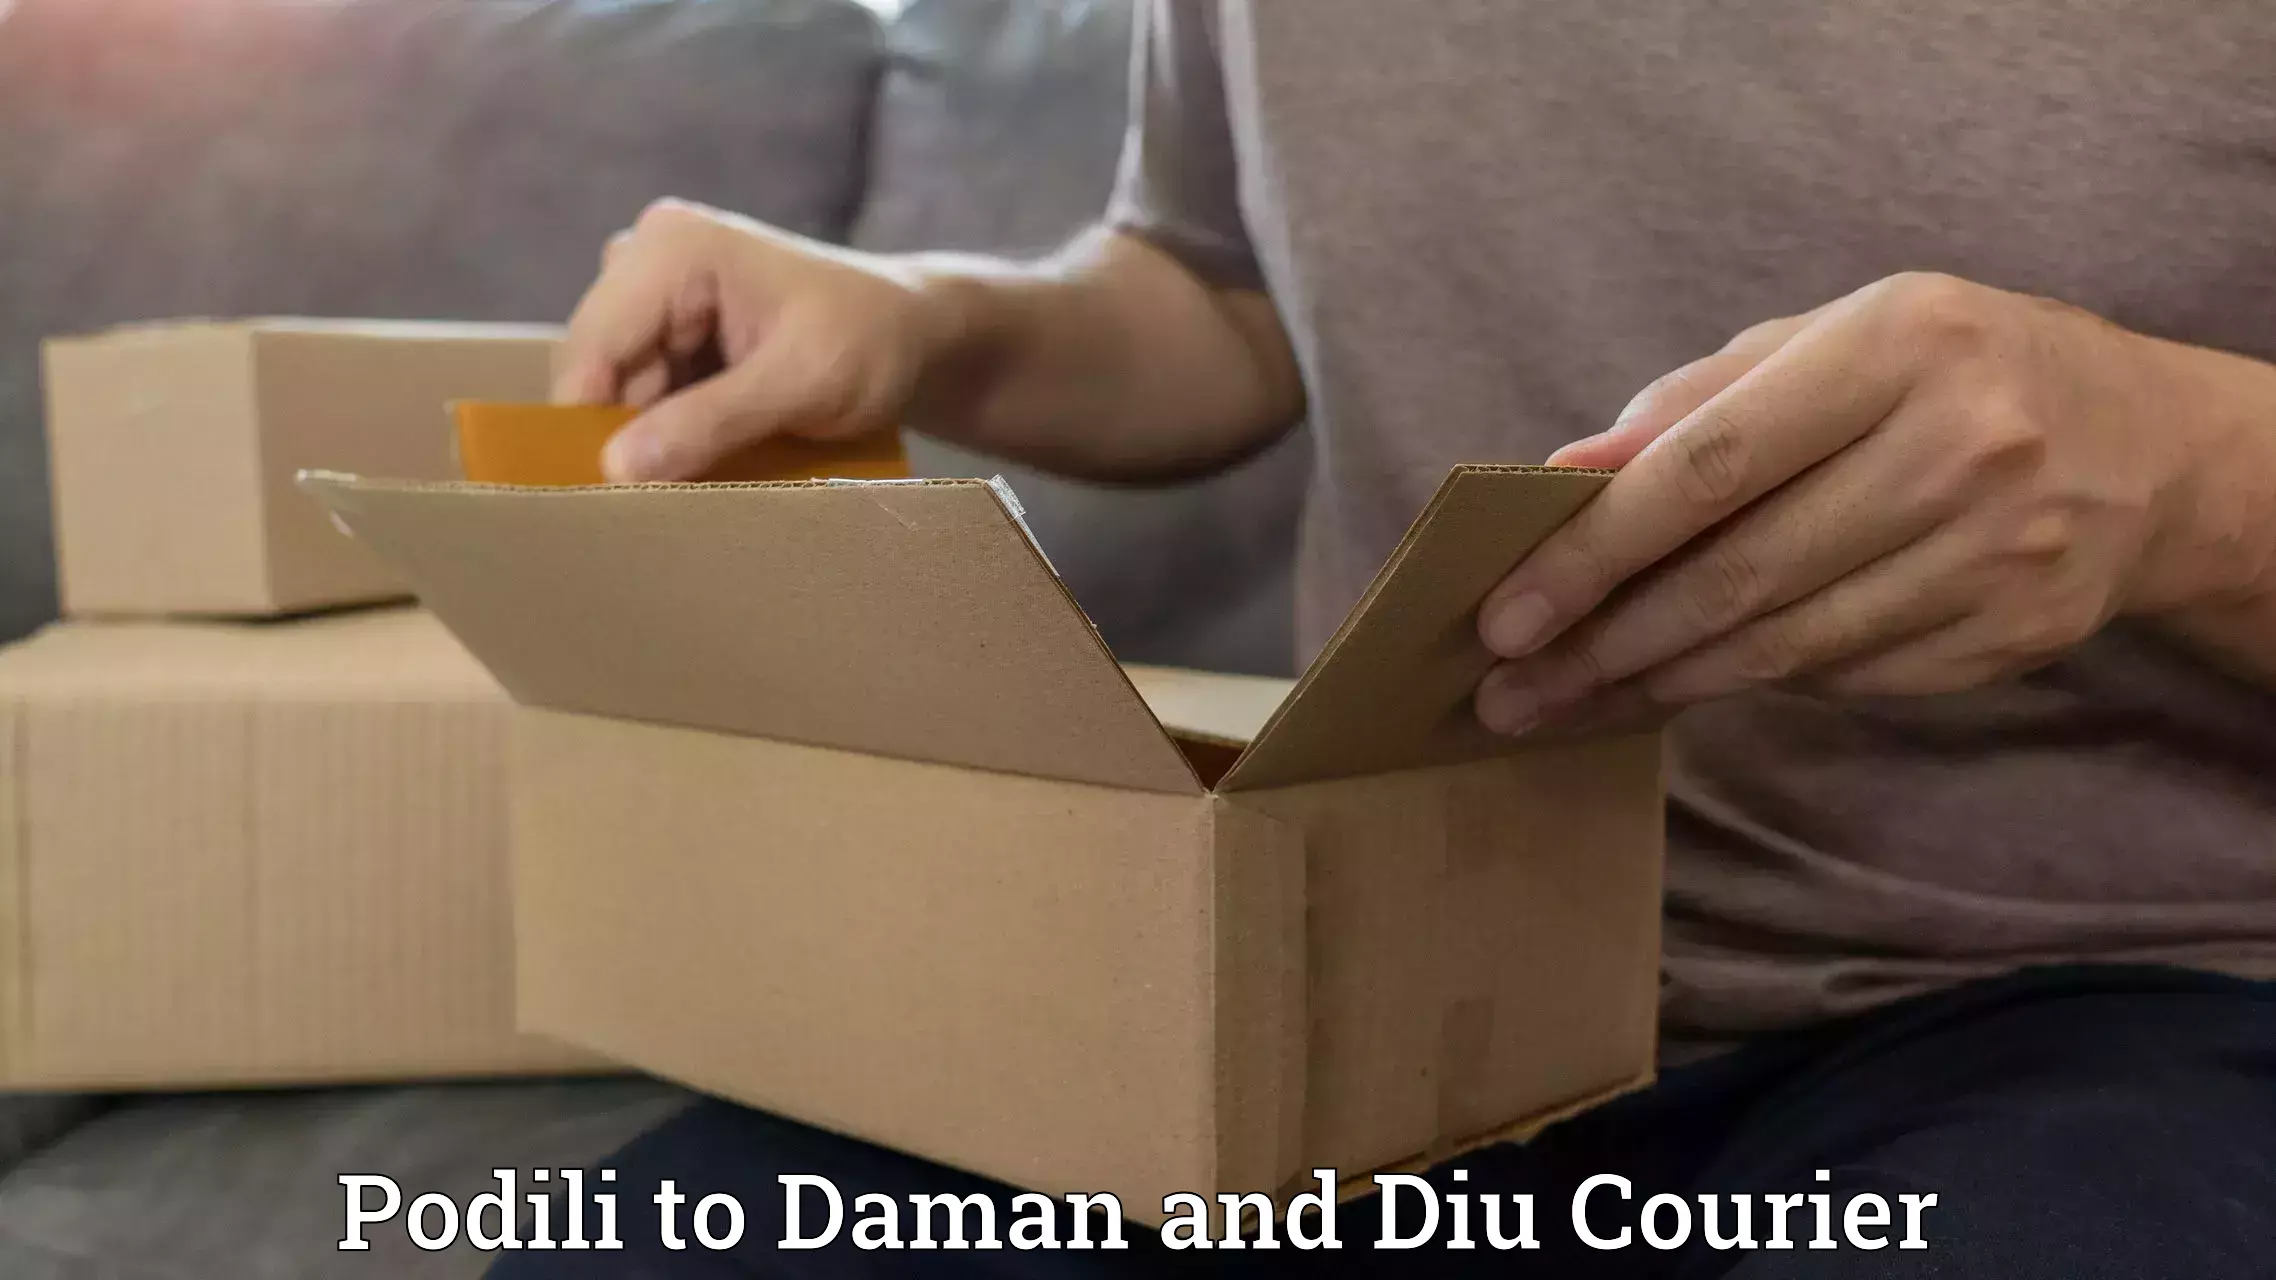 Residential courier service Podili to Daman and Diu